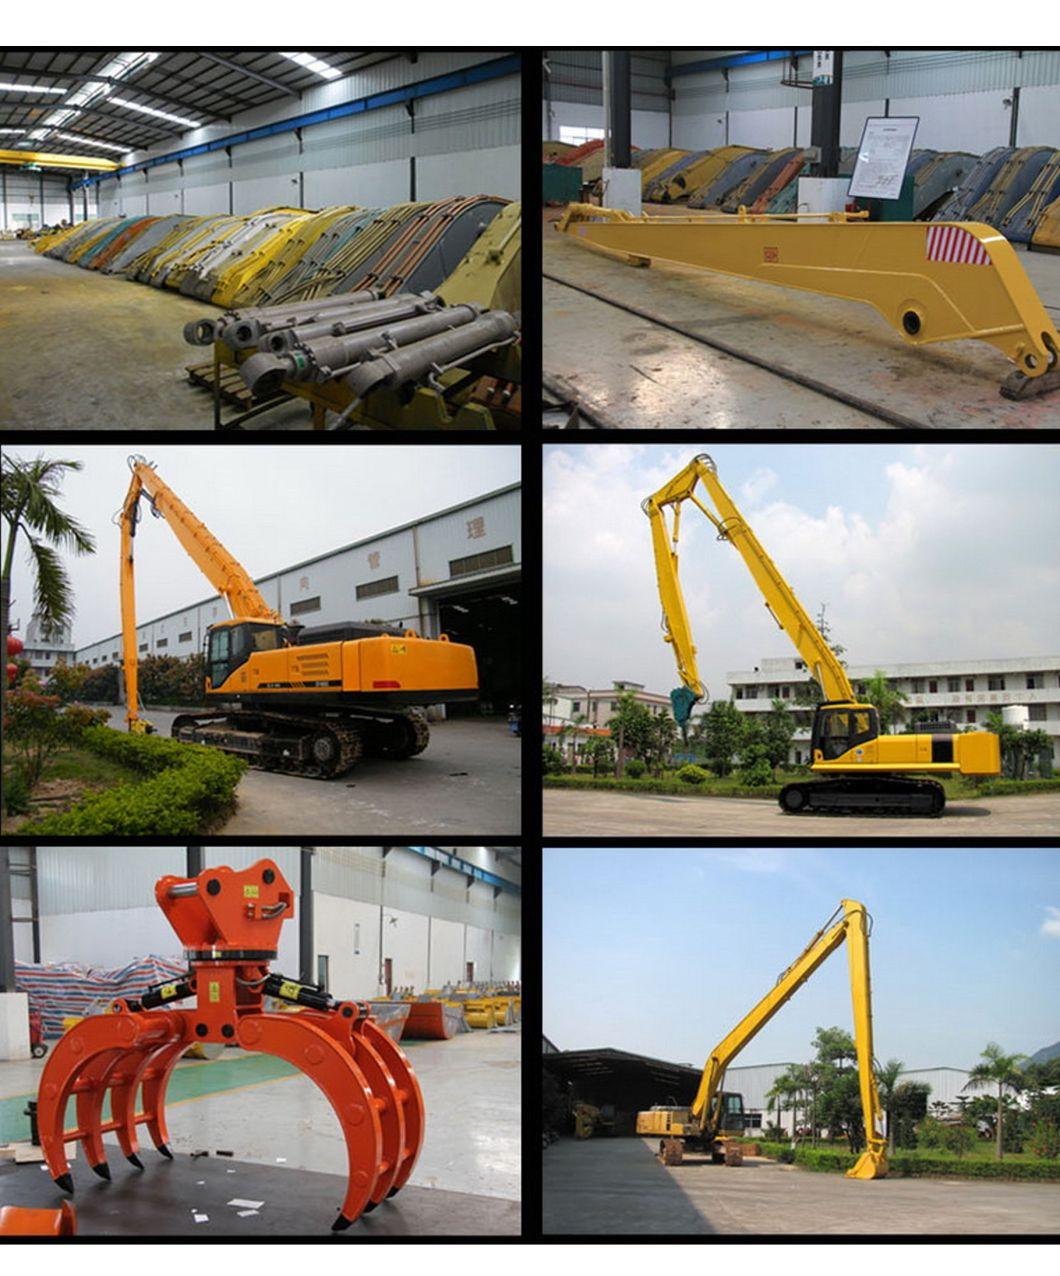 Excavator Parts Long Boom Long Arm with Cylinder and Bucket for Cat 320c 320d